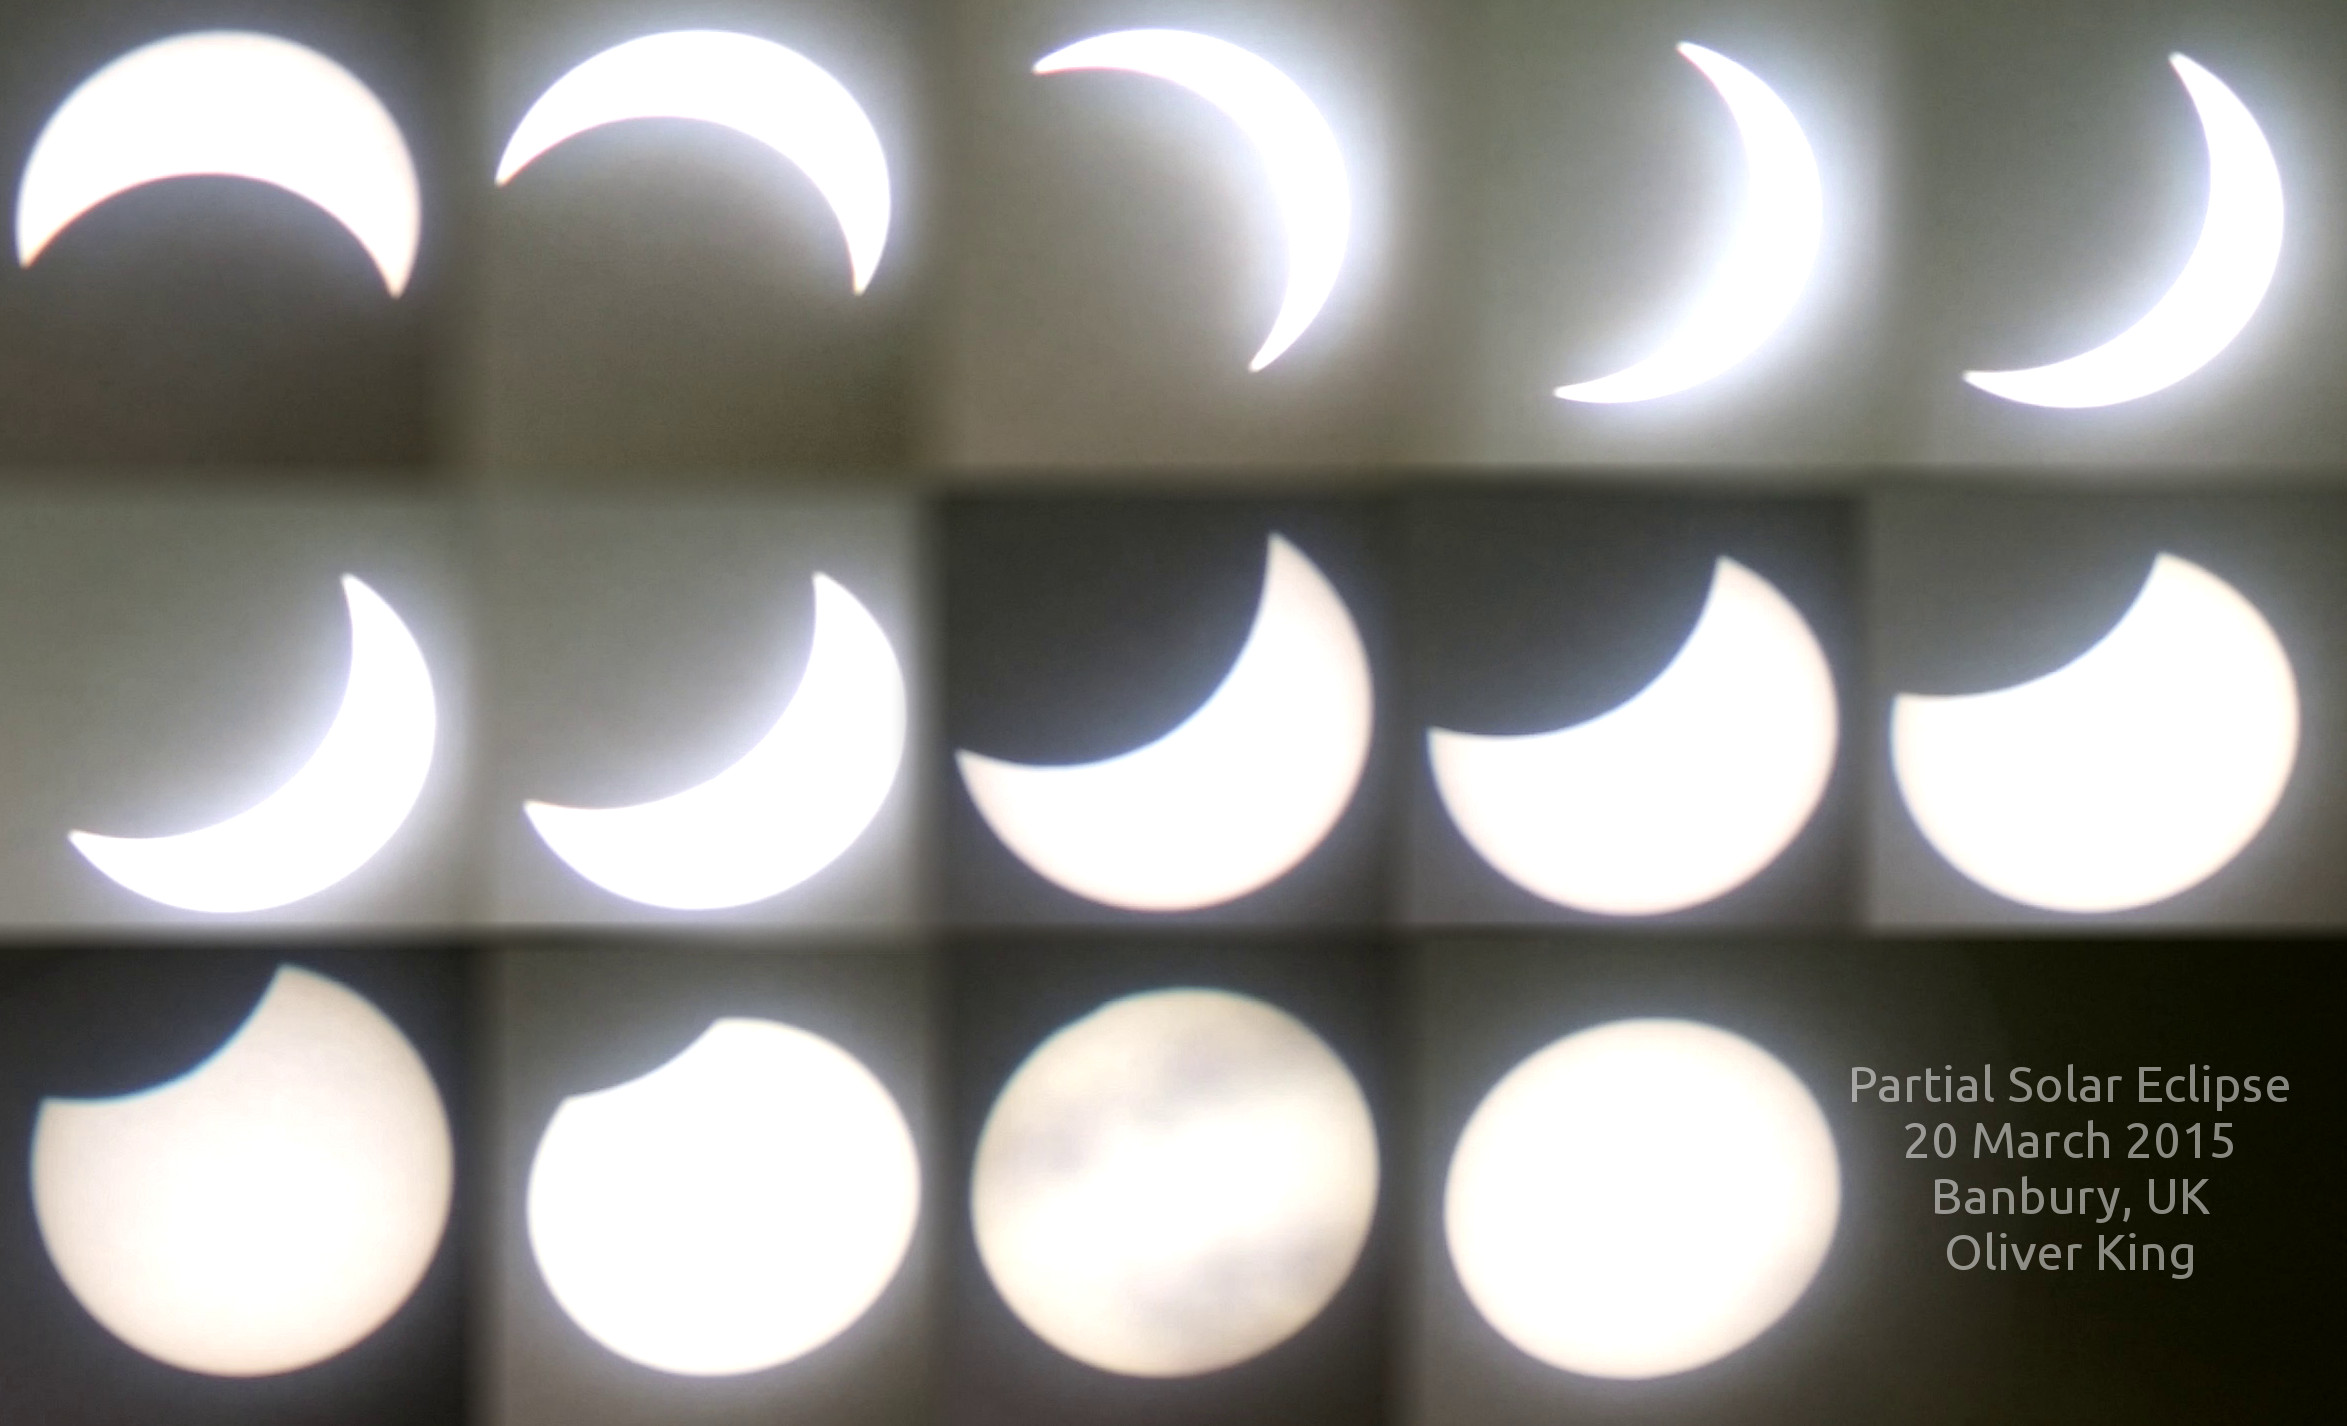 The eclipse by HCO member Oliver King